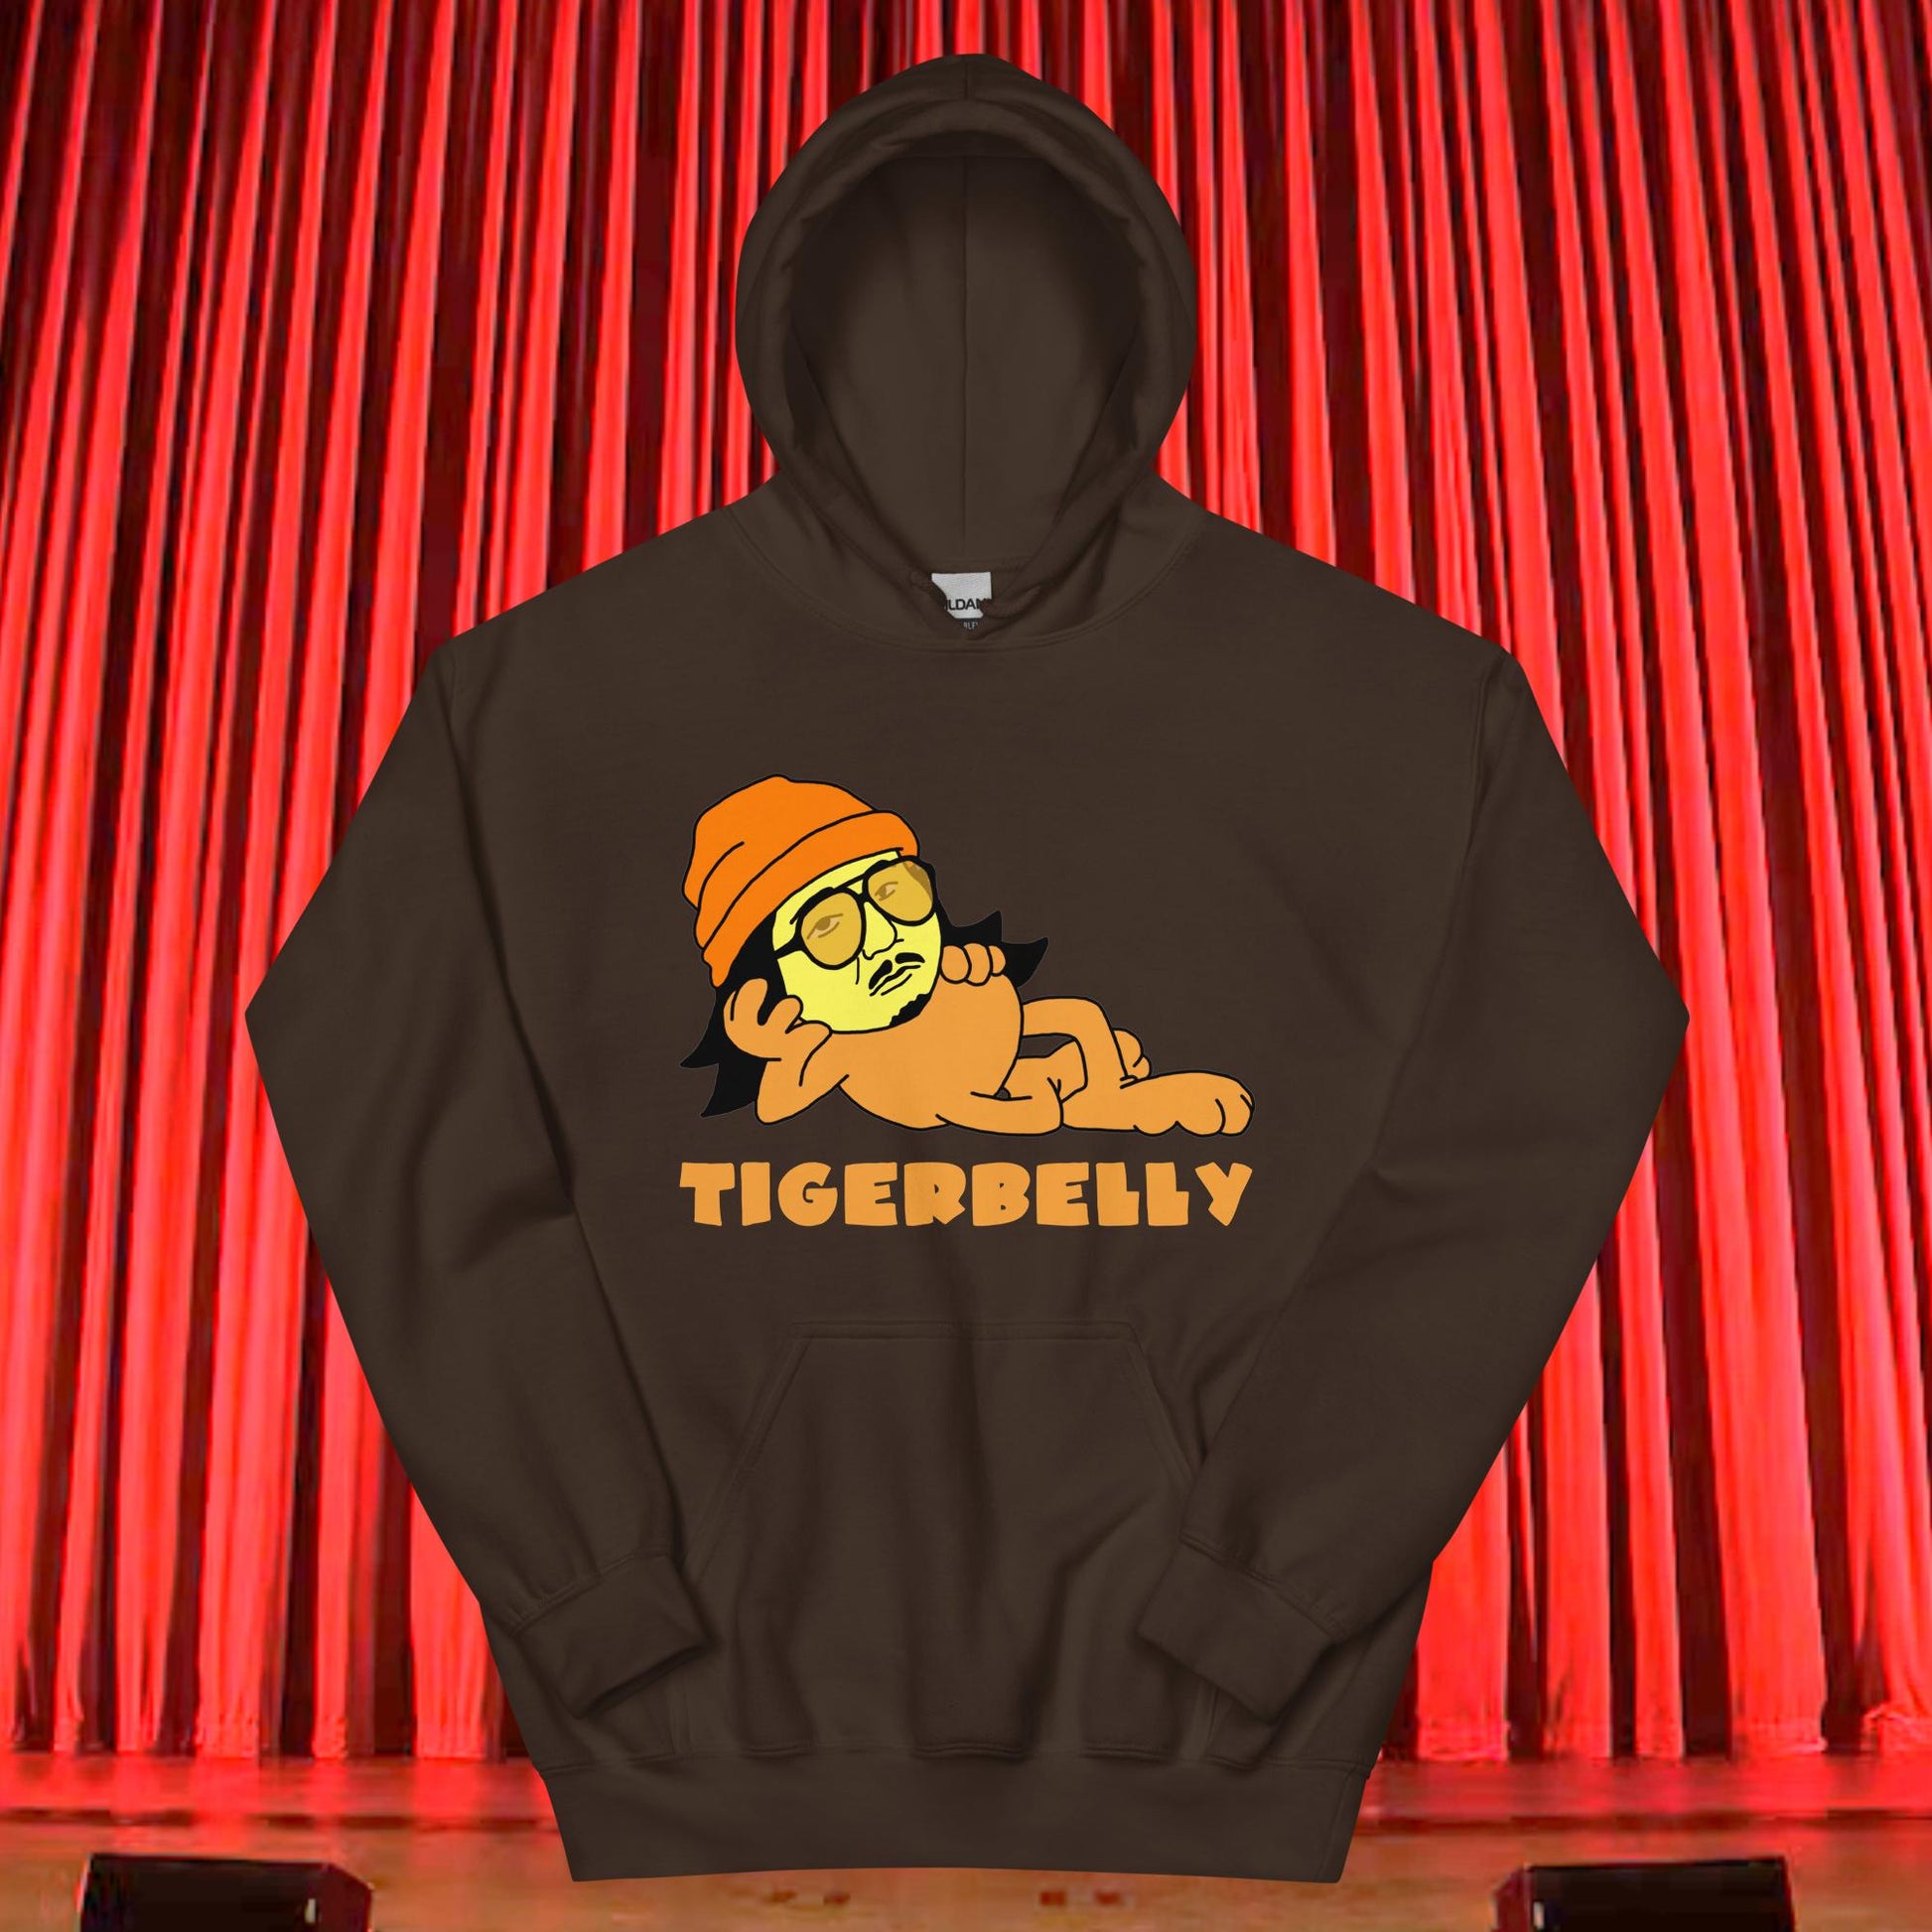 Bobby Lee Tigerbelly, Bobby Lee Merch, Tigerbelly Merch, Bobby Lee Gift, Funny Tigerbelly Gift, Tigerbelly Podcast, TigerBelly Unisex Hoodie Next Cult Brand Bobby Lee, Podcasts, Stand-up Comedy, TigerBelly